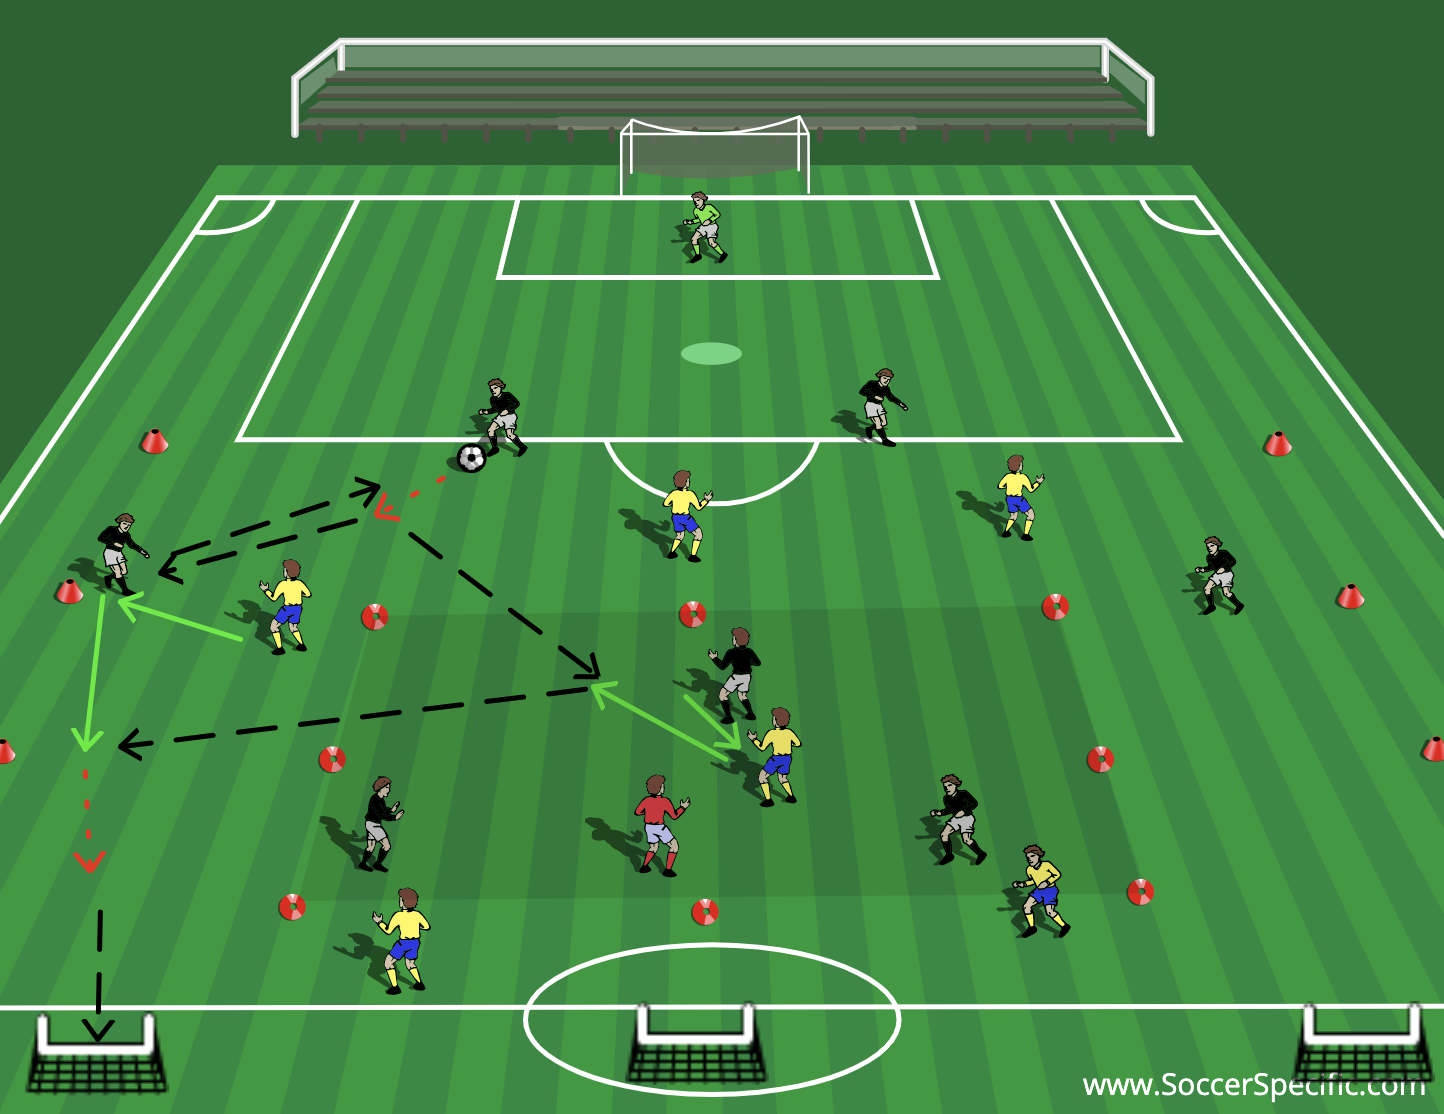 Building through the Midfield 4 | SoccerSpecific.com